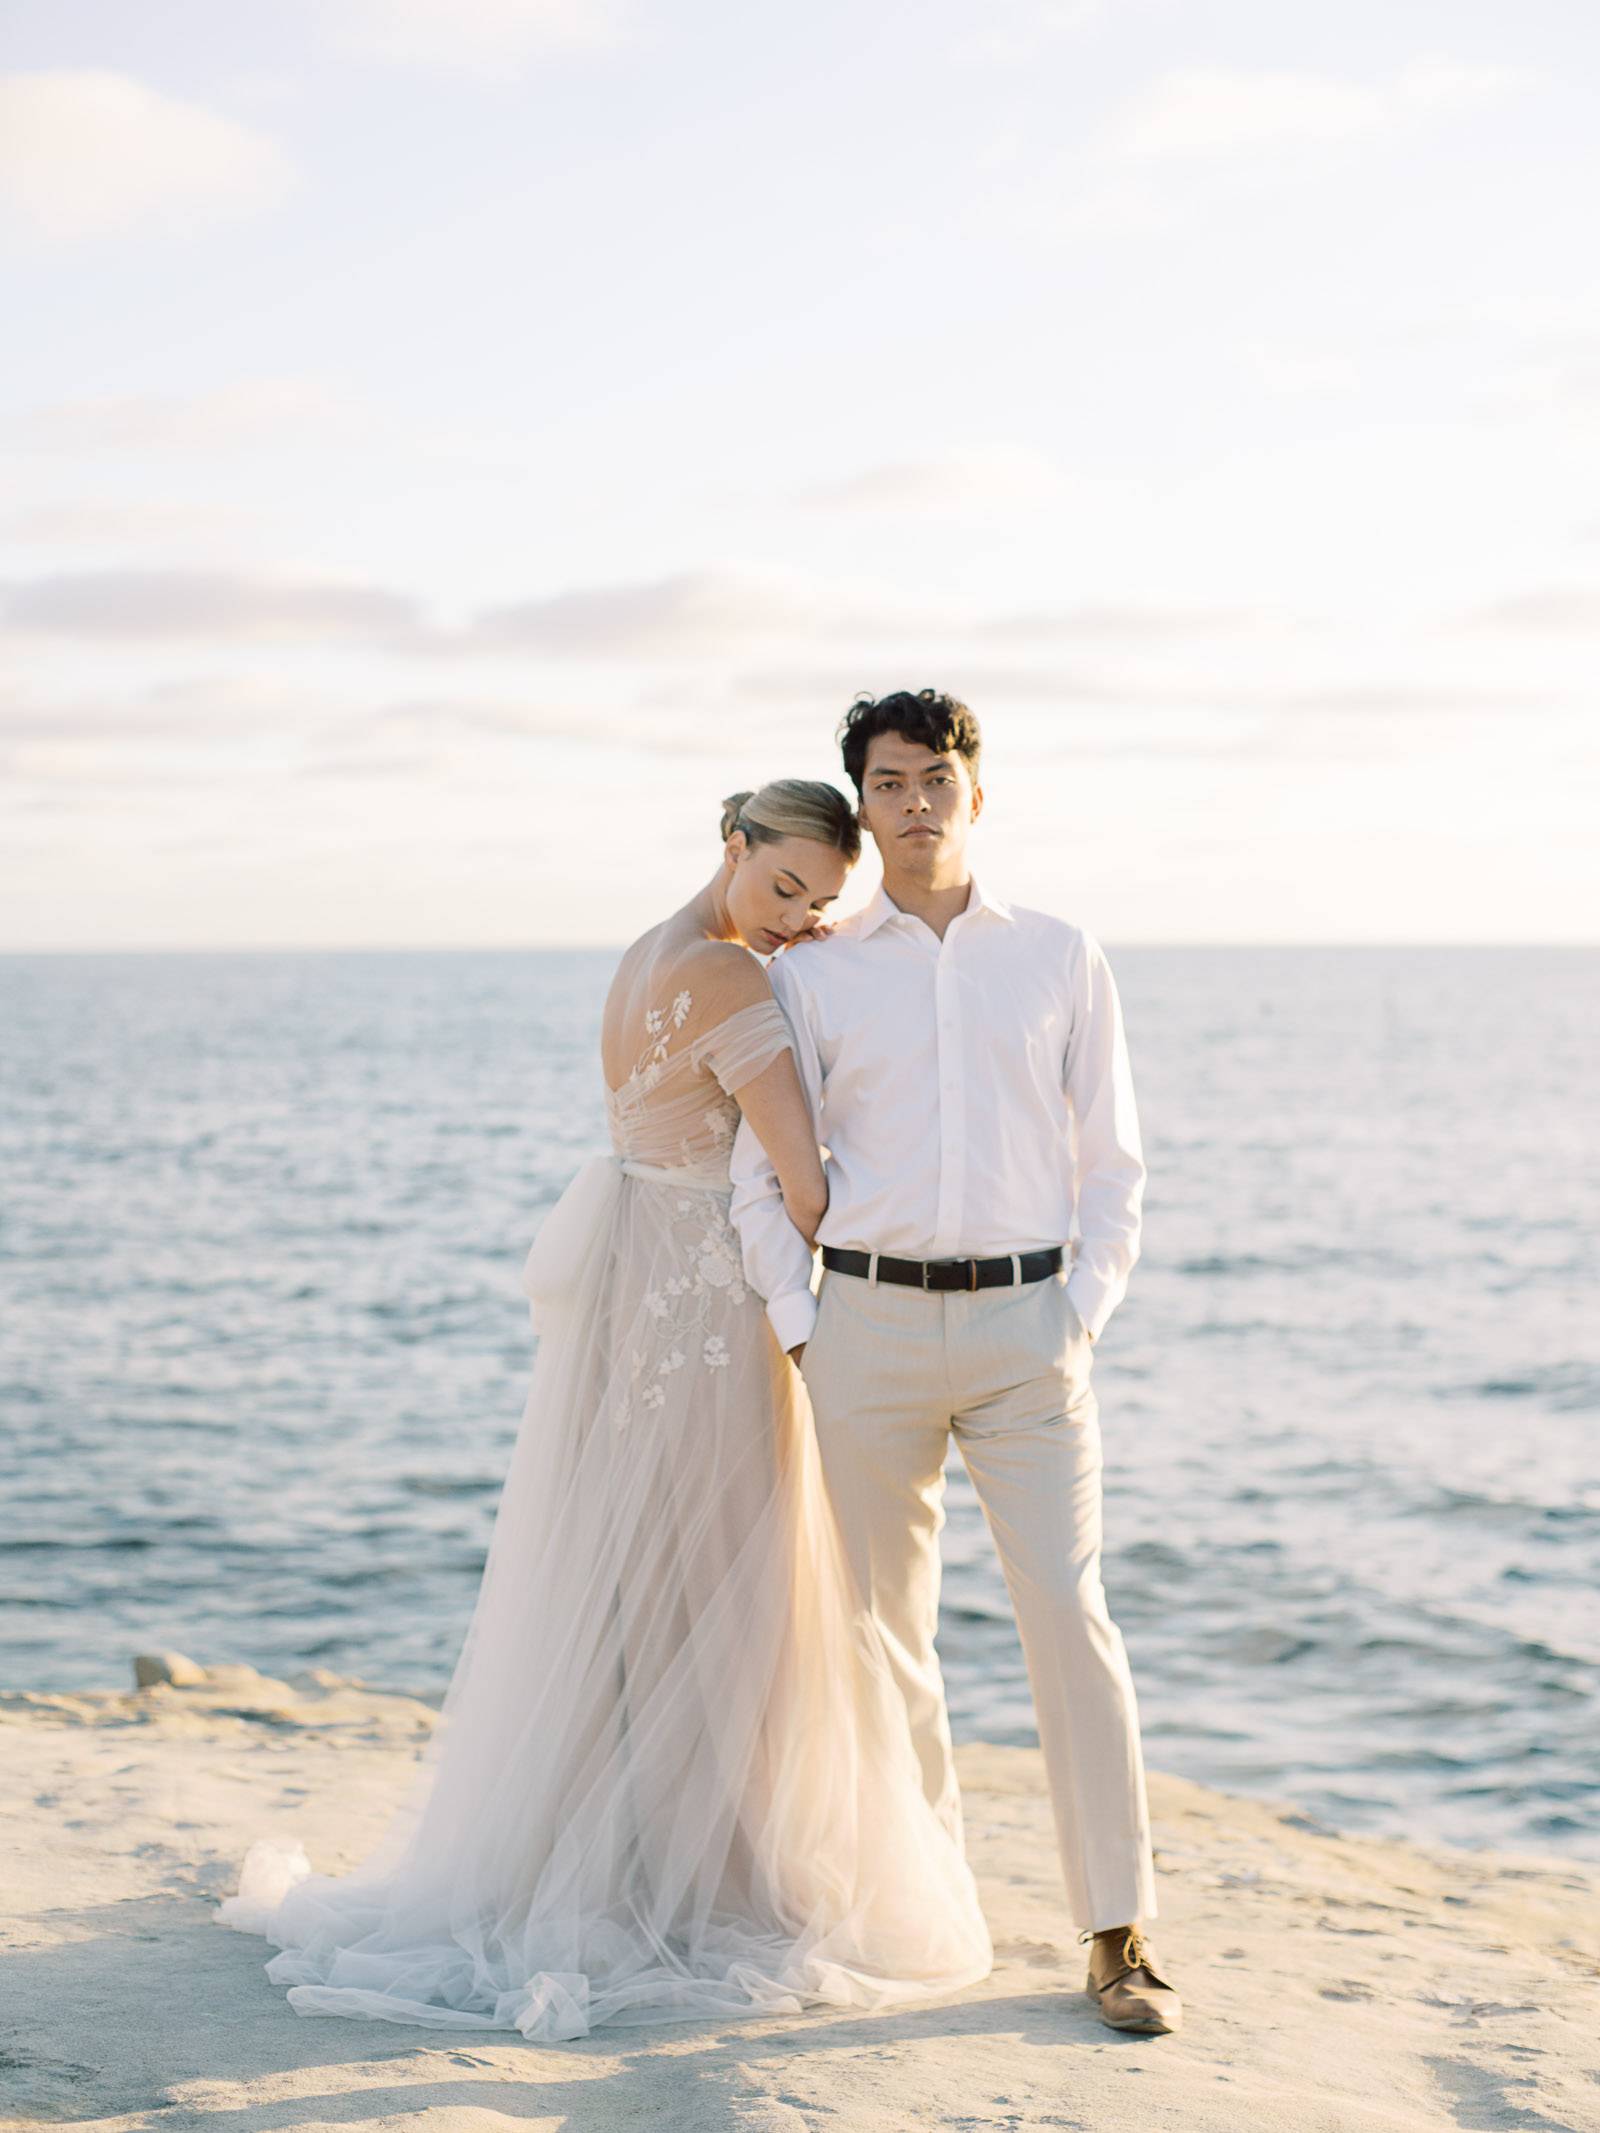 Intimate coastal wedding ideas from Southern California | Southern ...